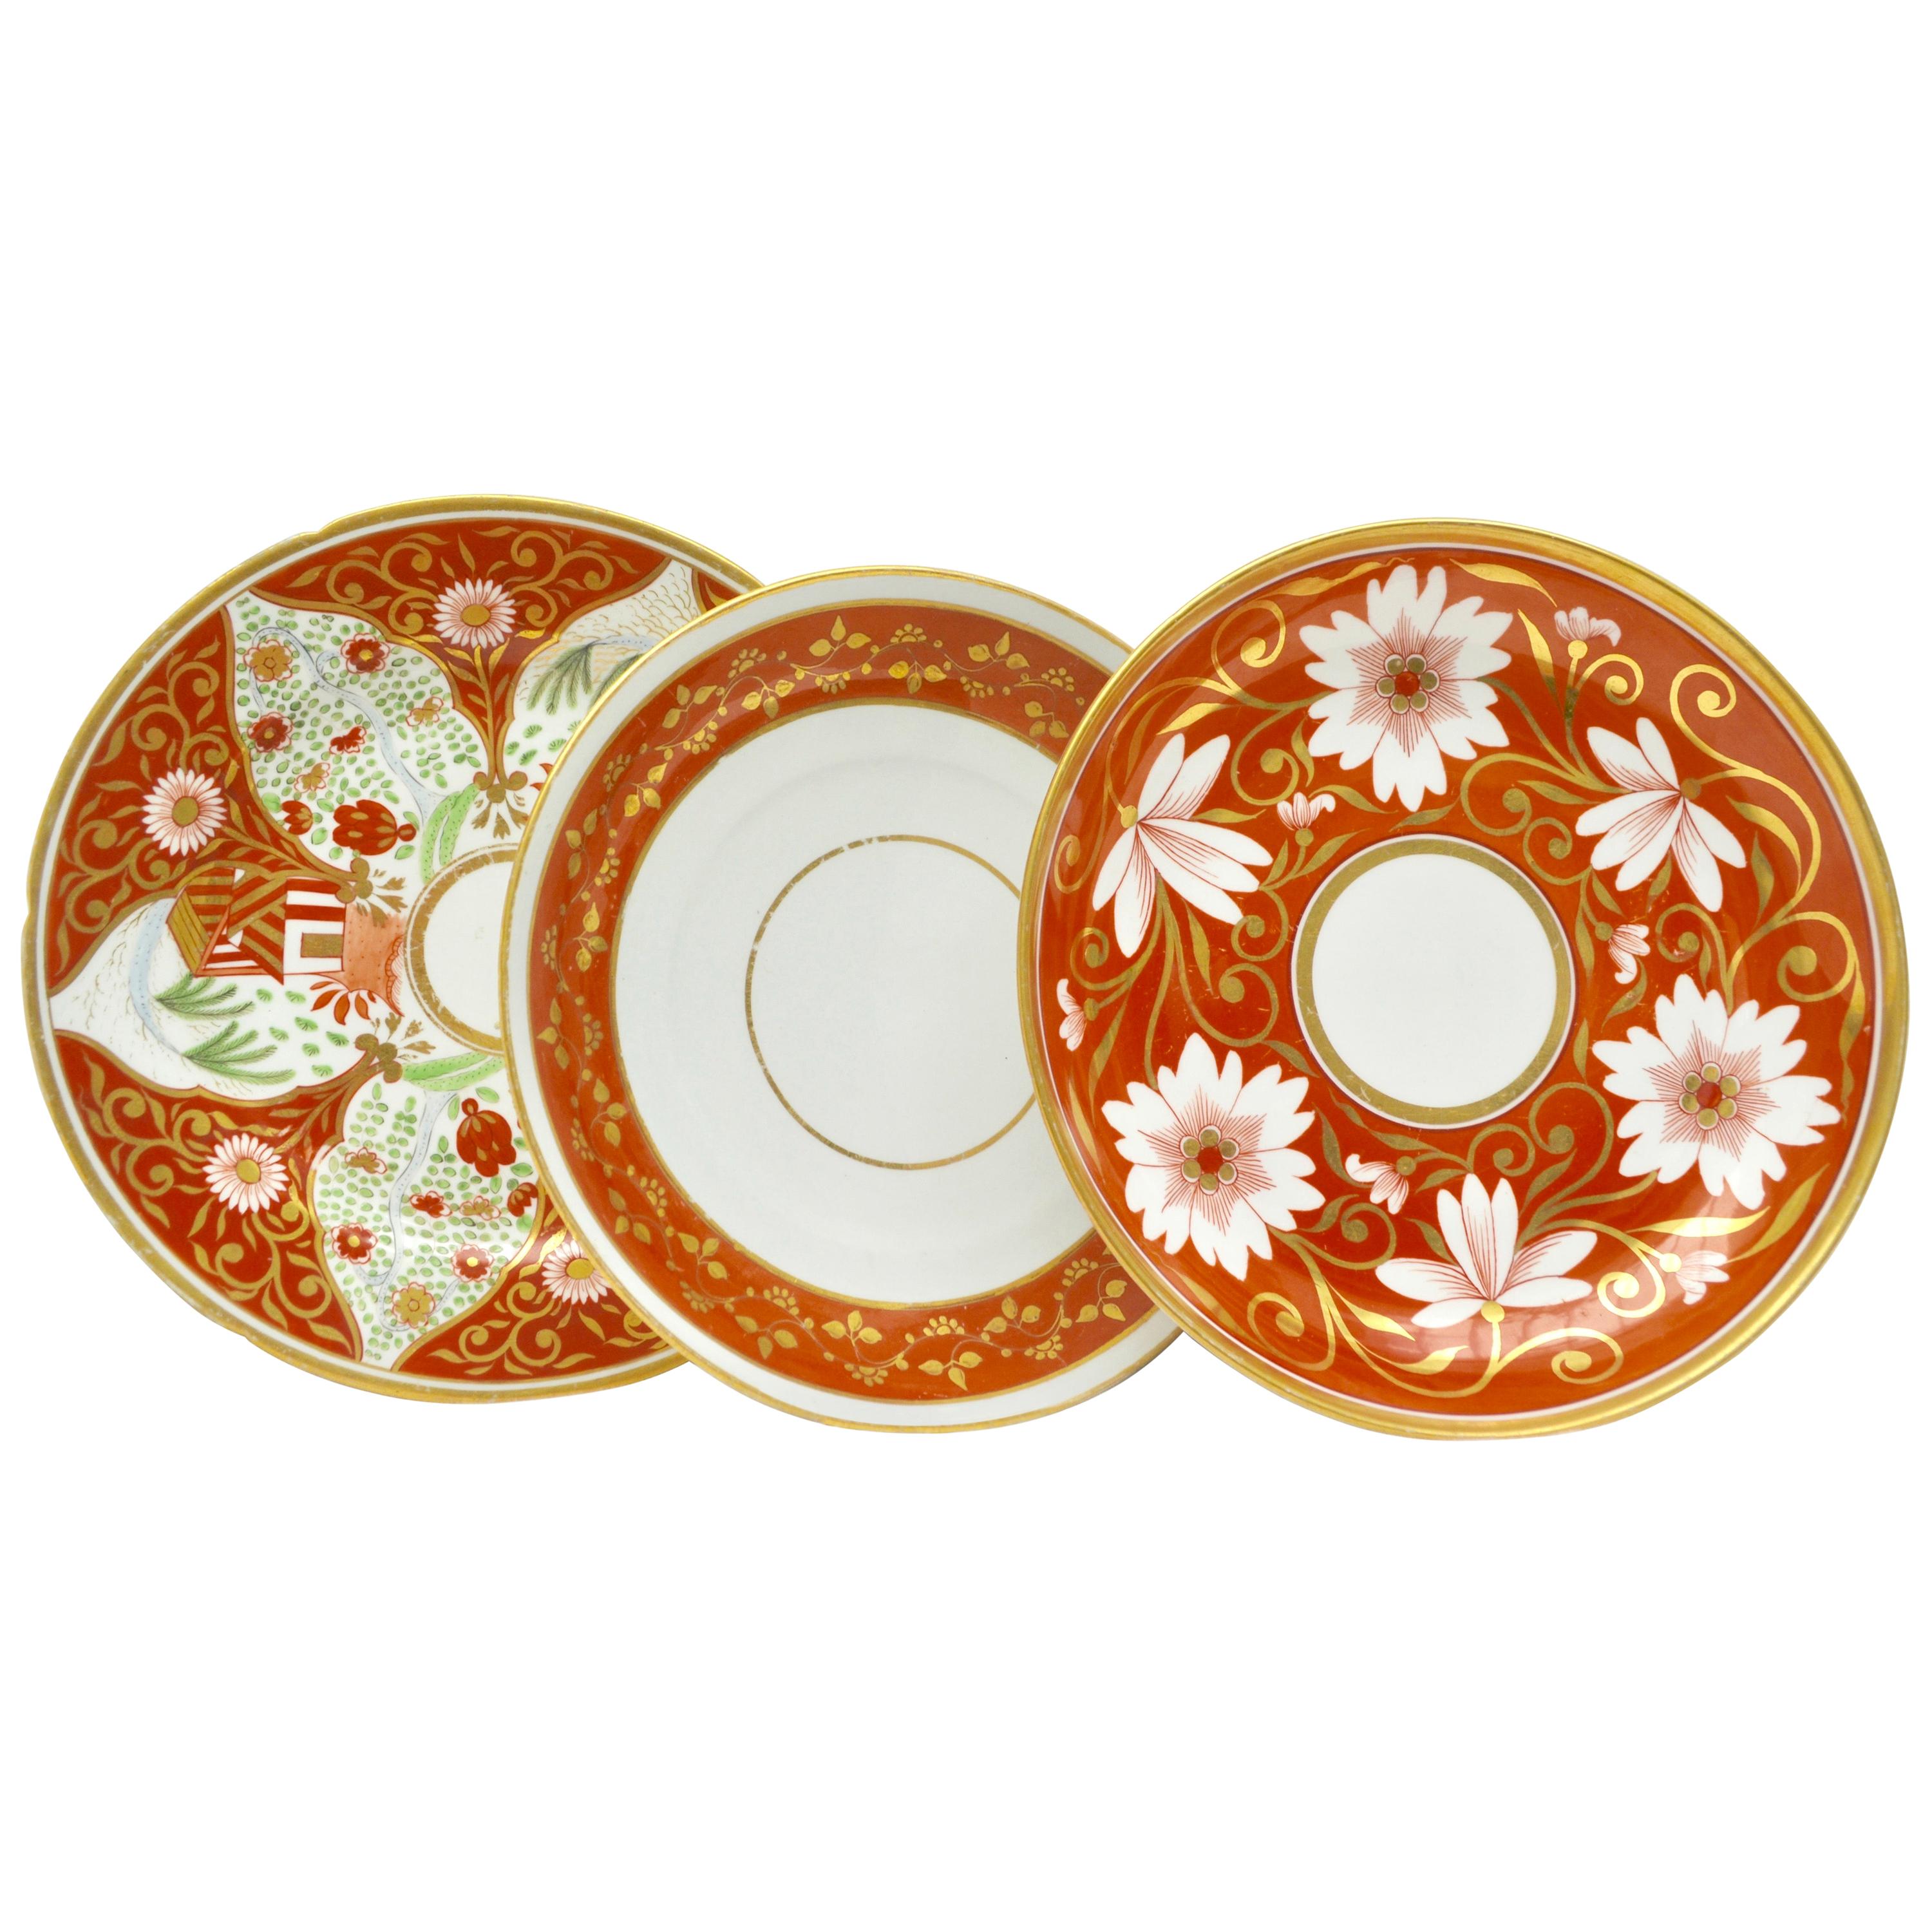 Set of Three Early 19th Century English Coral and Gold Porcelain Plates